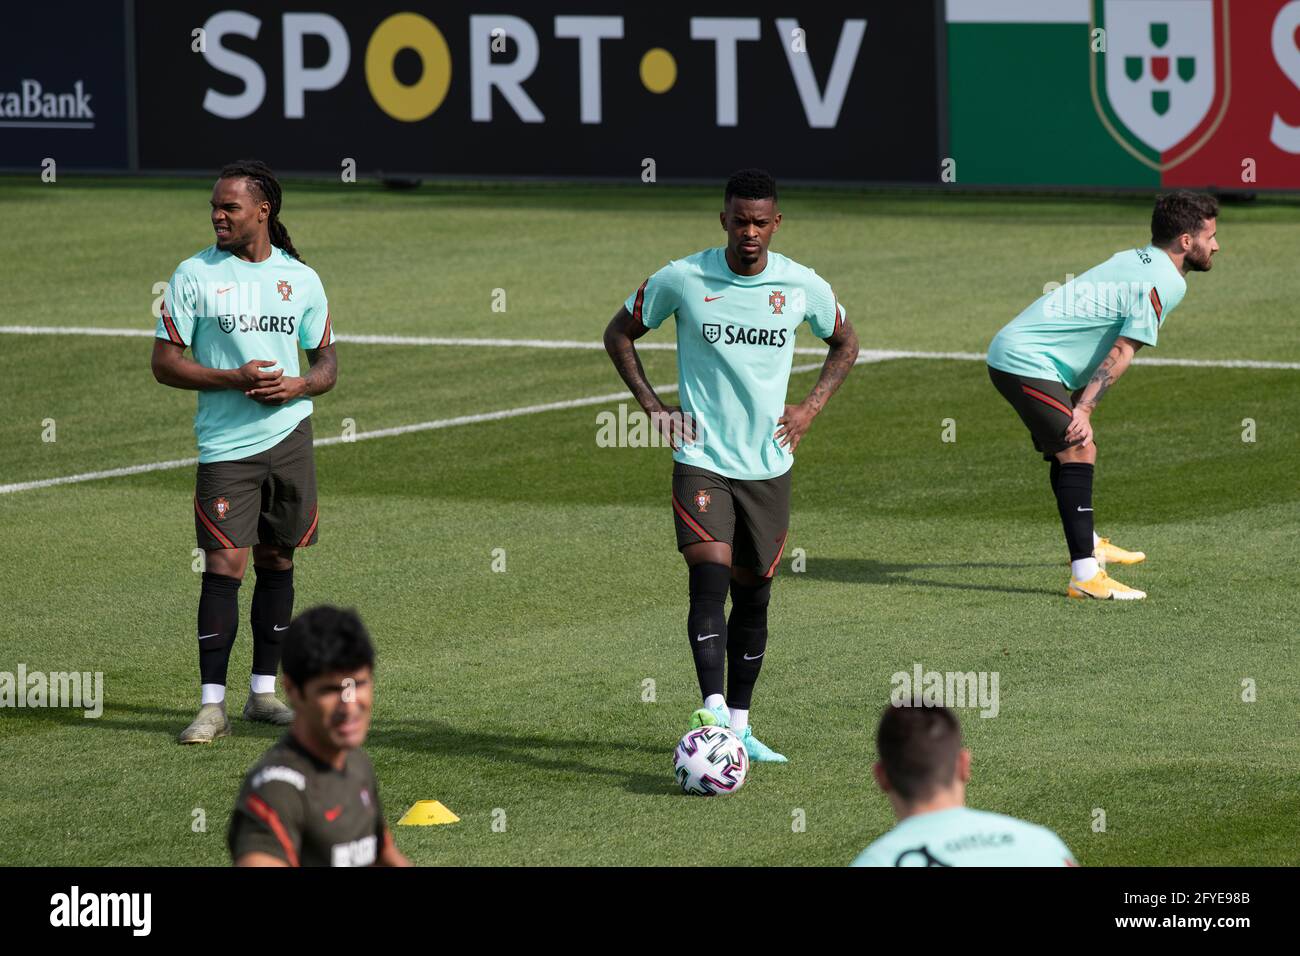 Oeiras, Portugal. 27th May, 2021. Renato Sanches (L), Nelson Semedo (C) and Rafa Silva (R) are seen in action during the training session at Cidade do Futebol training ground in Oeiras.Portugal football team trains for the first time before competing in the European football championship - EURO 2020 - scheduled to start on June 11th. (Photo by Hugo Amaral/SOPA Images/Sipa USA) Credit: Sipa USA/Alamy Live News Stock Photo